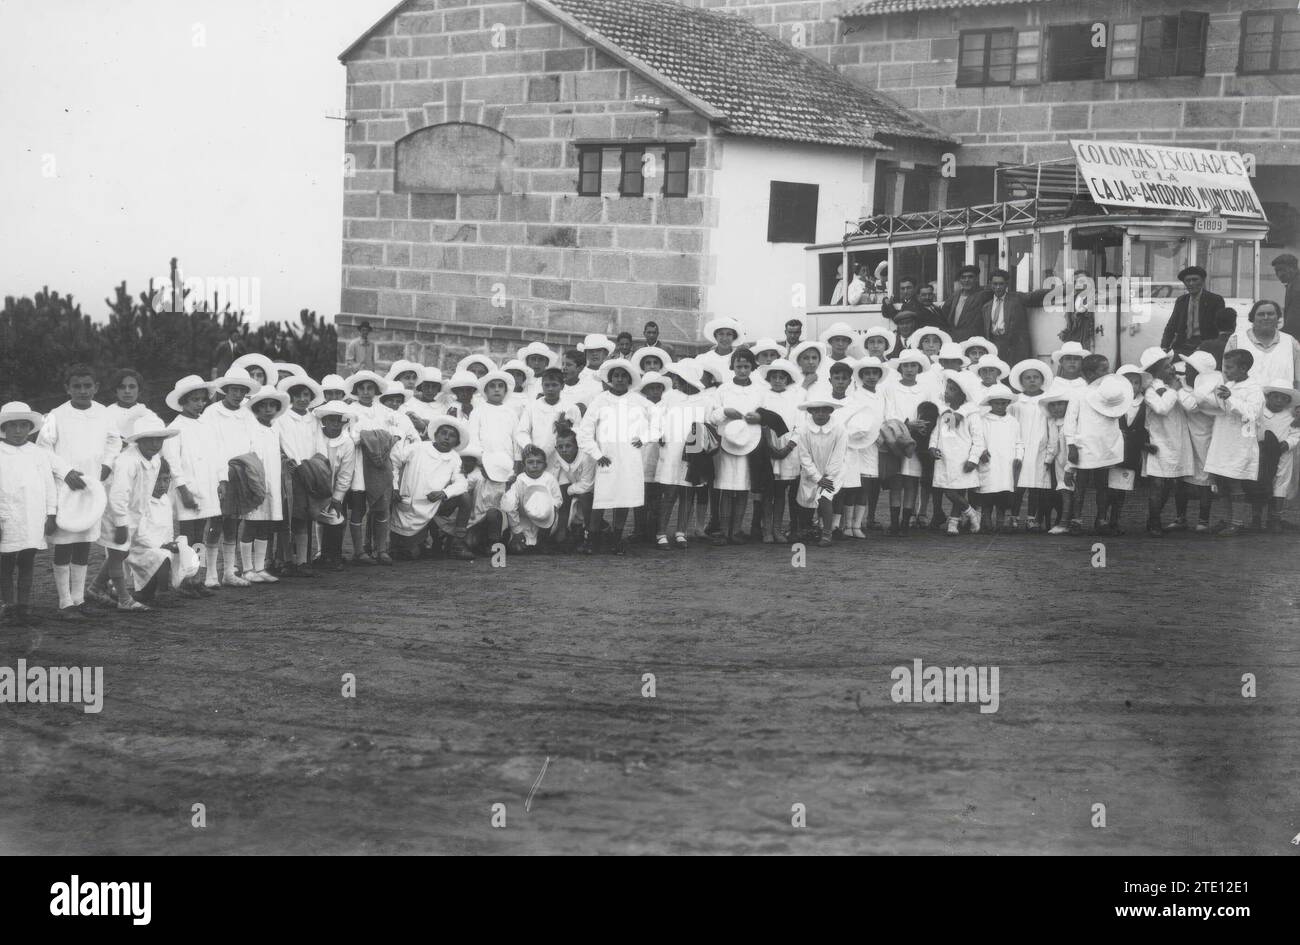 09/01/1930. School Colonies of the municipal Savings Bank Arrival at the Pavilion, of the Last Expedition of 50 Boys and Girls that Makes a Total of 100 Children Sent by the aforementioned Savings Bank. Credit: Album / Archivo ABC / Pacheco Stock Photo